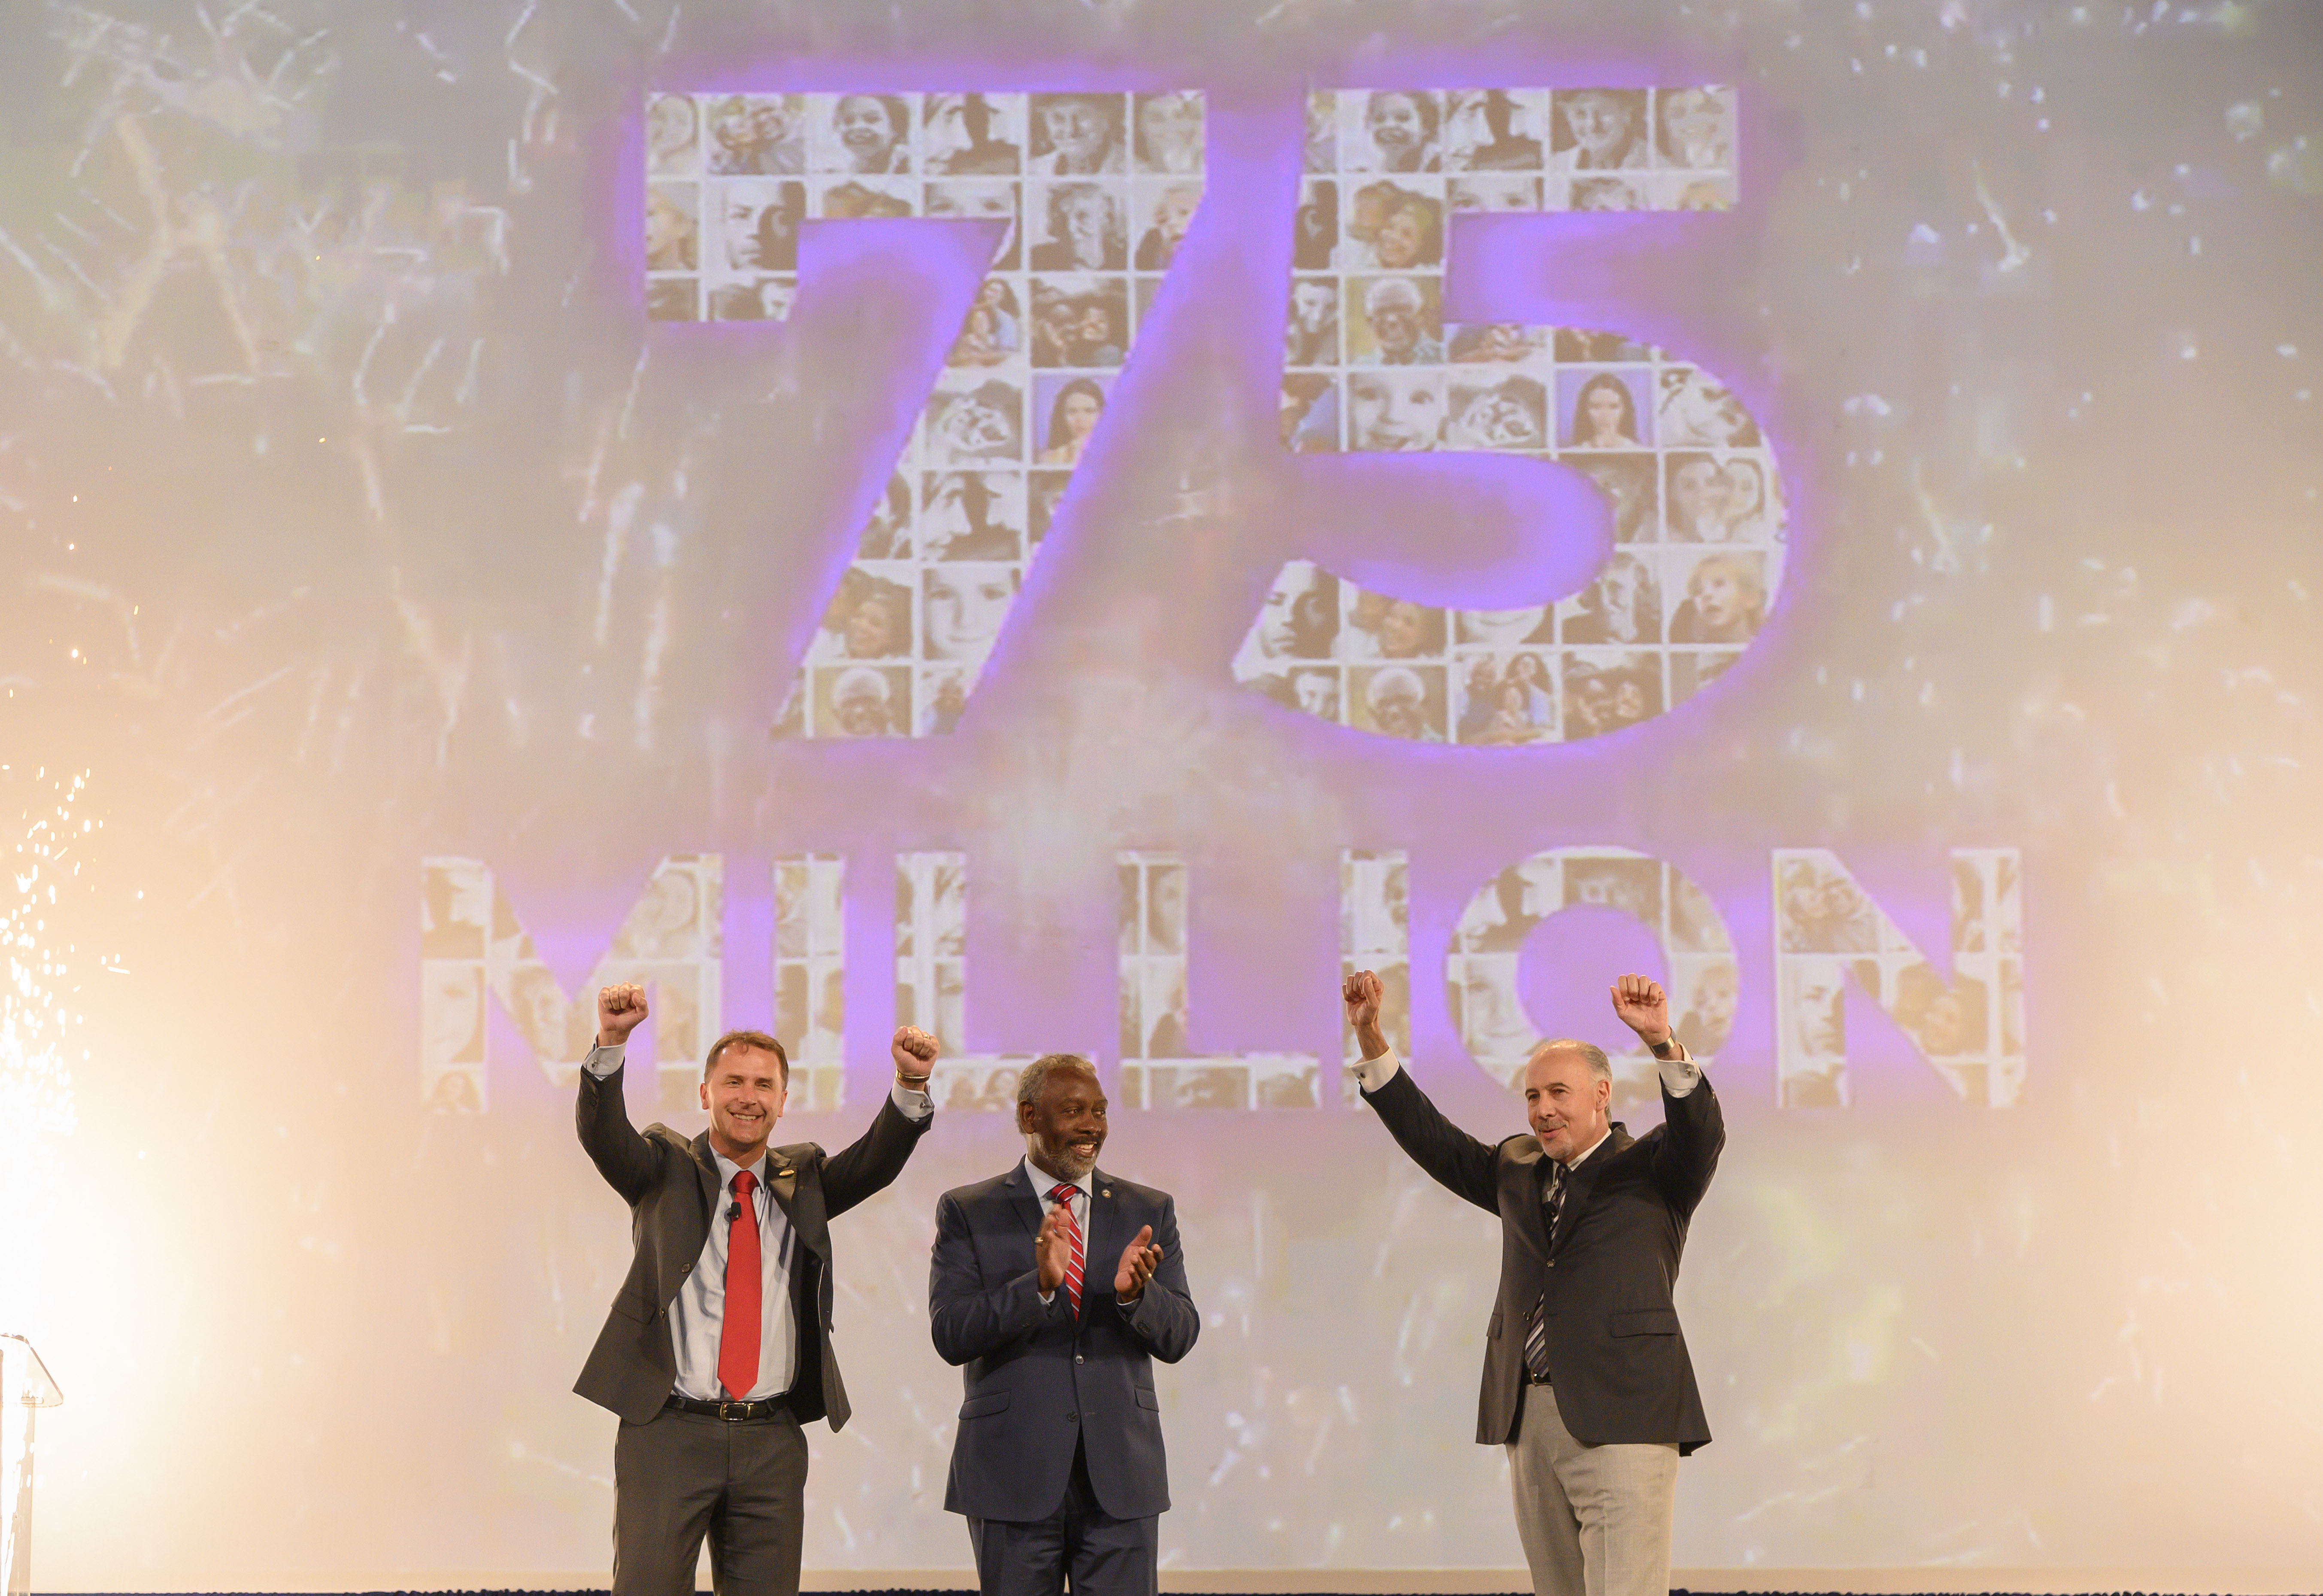 (Left to right) Adrian Jones, Visit Orlando Board Chair and Divisional Director USA, Merlin Entertainments USA Inc.; Orange County Mayor Jerry L. Demings; and George Aguel, President and CEO, Visit Orlando; celebrate a record 75 million visitors to Orlando in 2018.
